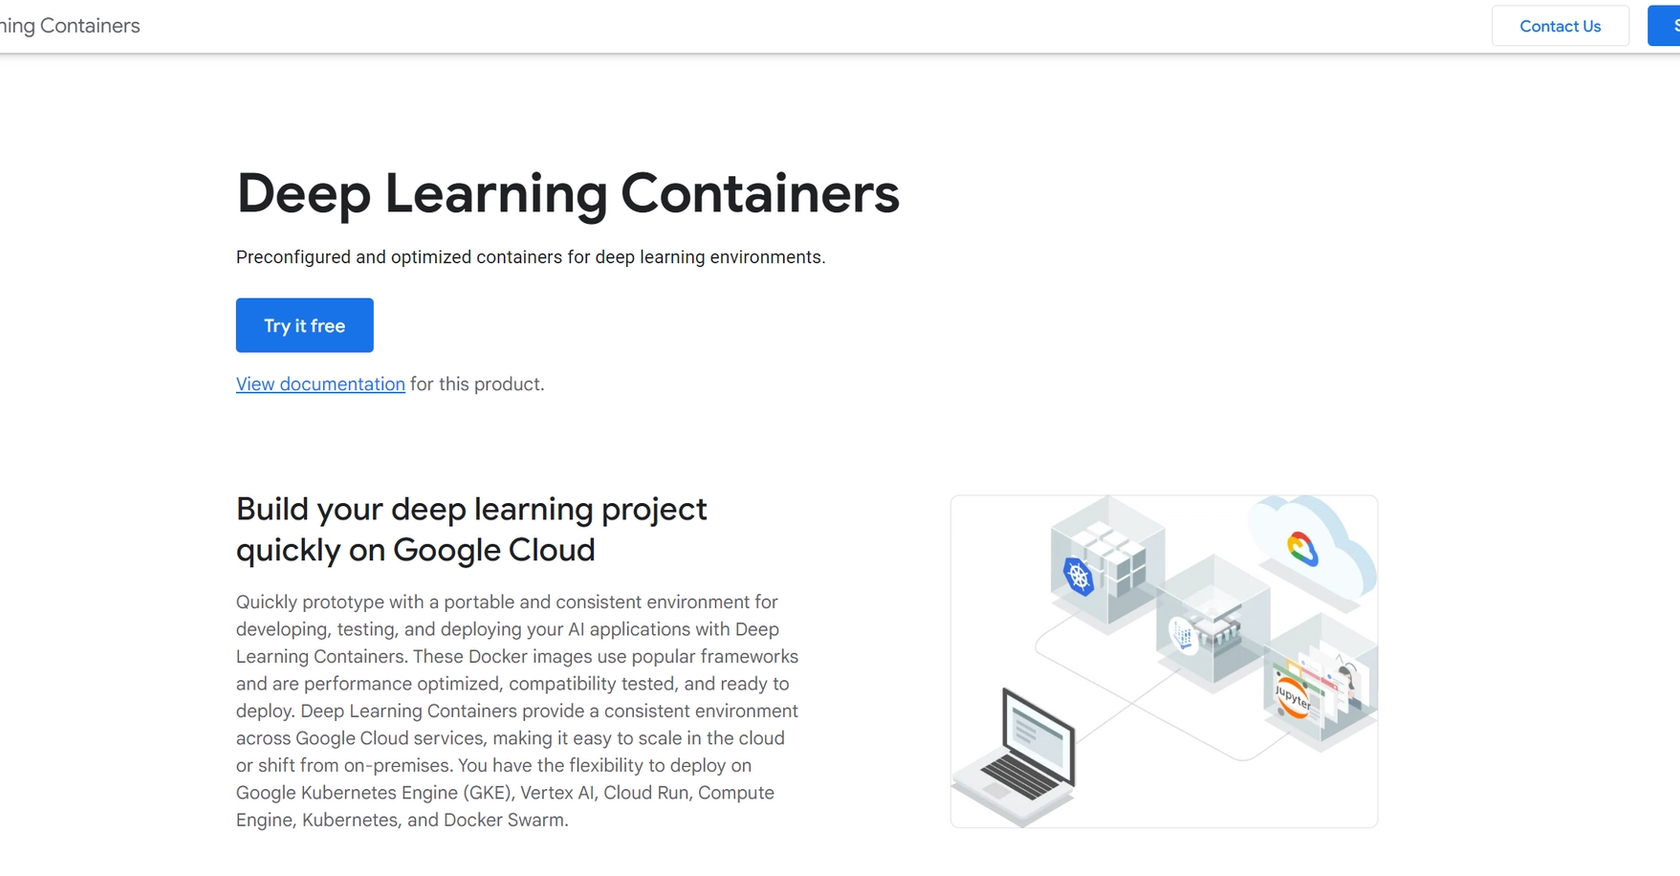 Google Deep Learning Containers